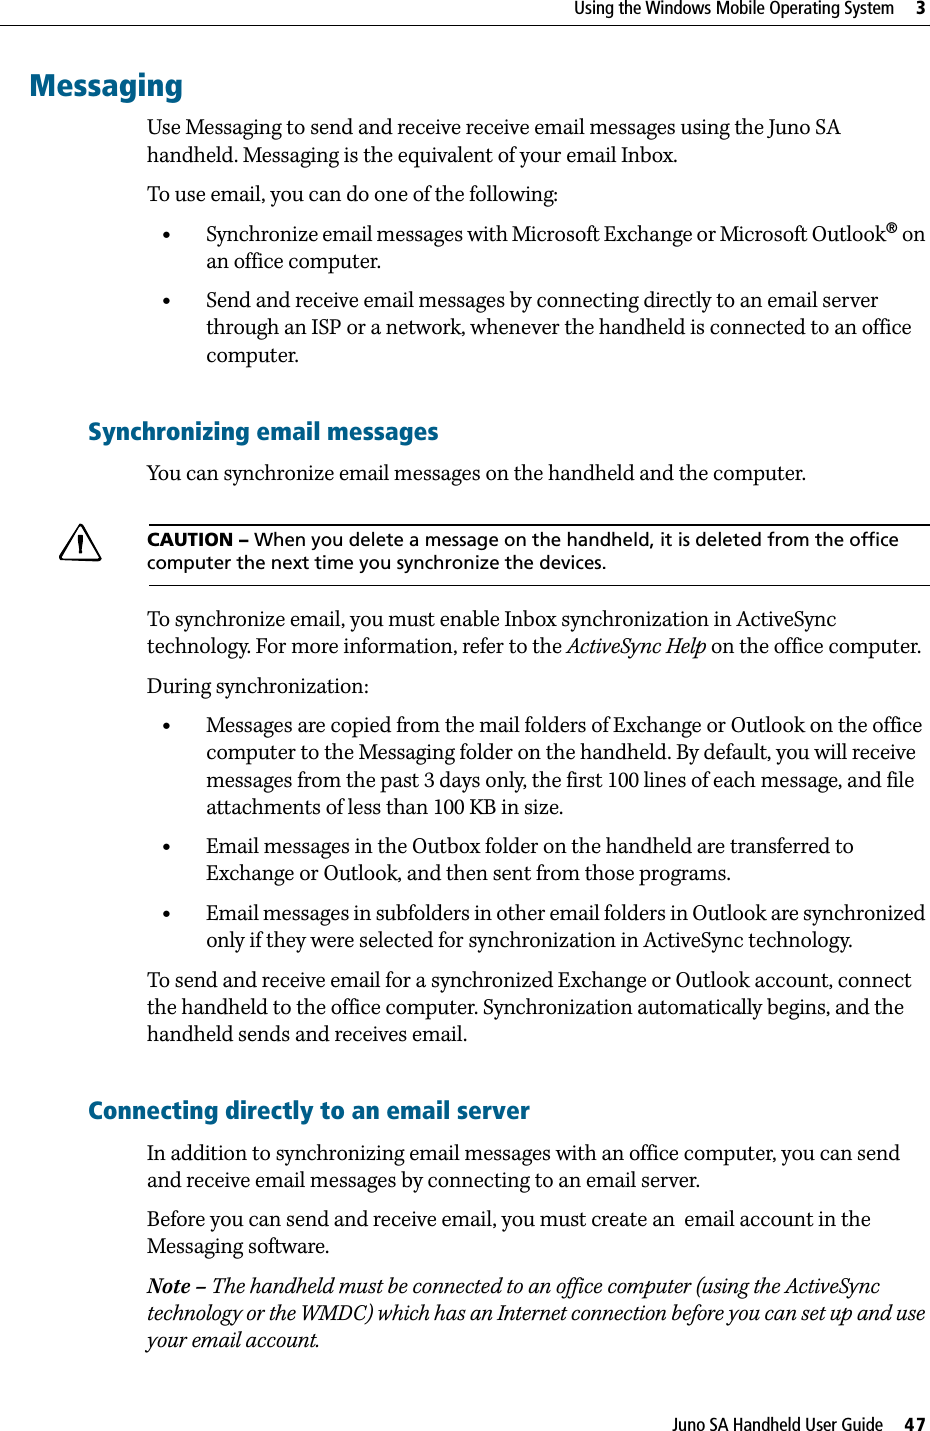 Juno SA Handheld User Guide     47Using the Windows Mobile Operating System     3MessagingUse Messaging to send and receive receive email messages using the Juno SA handheld. Messaging is the equivalent of your email Inbox. To use email, you can do one of the following:•Synchronize email messages with Microsoft Exchange or Microsoft Outlook® on an office computer.•Send and receive email messages by connecting directly to an email server through an ISP or a network, whenever the handheld is connected to an office computer.Synchronizing email messagesYou can synchronize email messages on the handheld and the computer. CCAUTION – When you delete a message on the handheld, it is deleted from the office computer the next time you synchronize the devices.To synchronize email, you must enable Inbox synchronization in ActiveSync technology. For more information, refer to the ActiveSync Help on the office computer.During synchronization:•Messages are copied from the mail folders of Exchange or Outlook on the office computer to the Messaging folder on the handheld. By default, you will receive messages from the past 3 days only, the first 100 lines of each message, and file attachments of less than 100 KB in size.•Email messages in the Outbox folder on the handheld are transferred to Exchange or Outlook, and then sent from those programs.•Email messages in subfolders in other email folders in Outlook are synchronized only if they were selected for synchronization in ActiveSync technology. To send and receive email for a synchronized Exchange or Outlook account, connect the handheld to the office computer. Synchronization automatically begins, and the handheld sends and receives email.Connecting directly to an email serverIn addition to synchronizing email messages with an office computer, you can send and receive email messages by connecting to an email server. Before you can send and receive email, you must create an  email account in the Messaging software.Note – The handheld must be connected to an office computer (using the ActiveSync technology or the WMDC) which has an Internet connection before you can set up and use your email account.